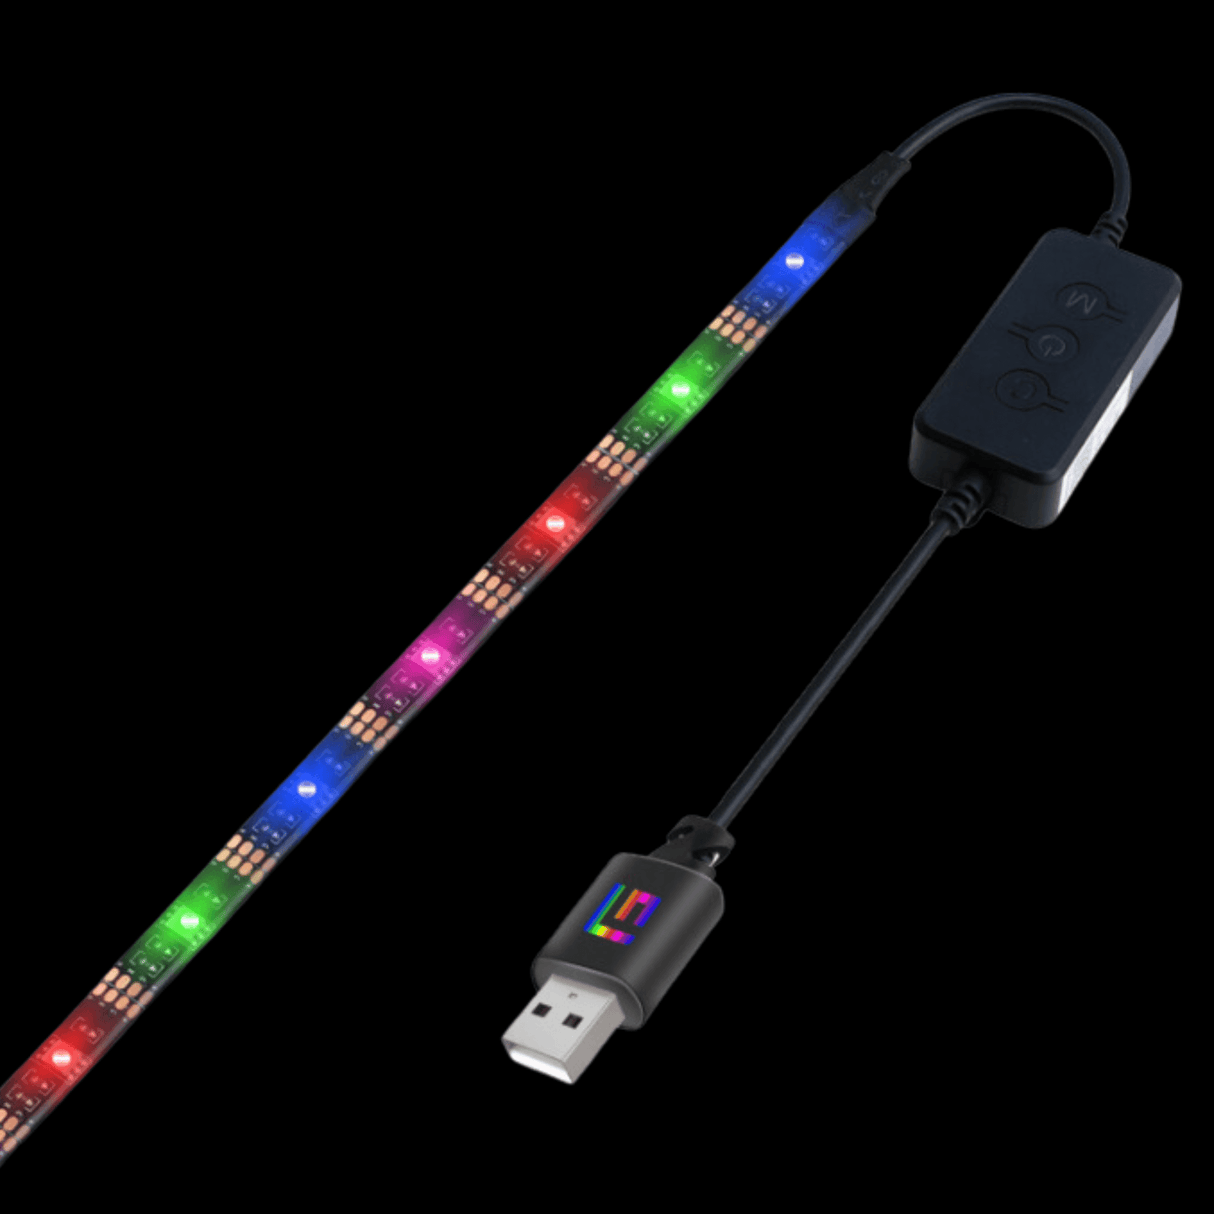 2M/7ft RGB Light Strip with Bluetooth and Remote Control - FLOATING GRIP